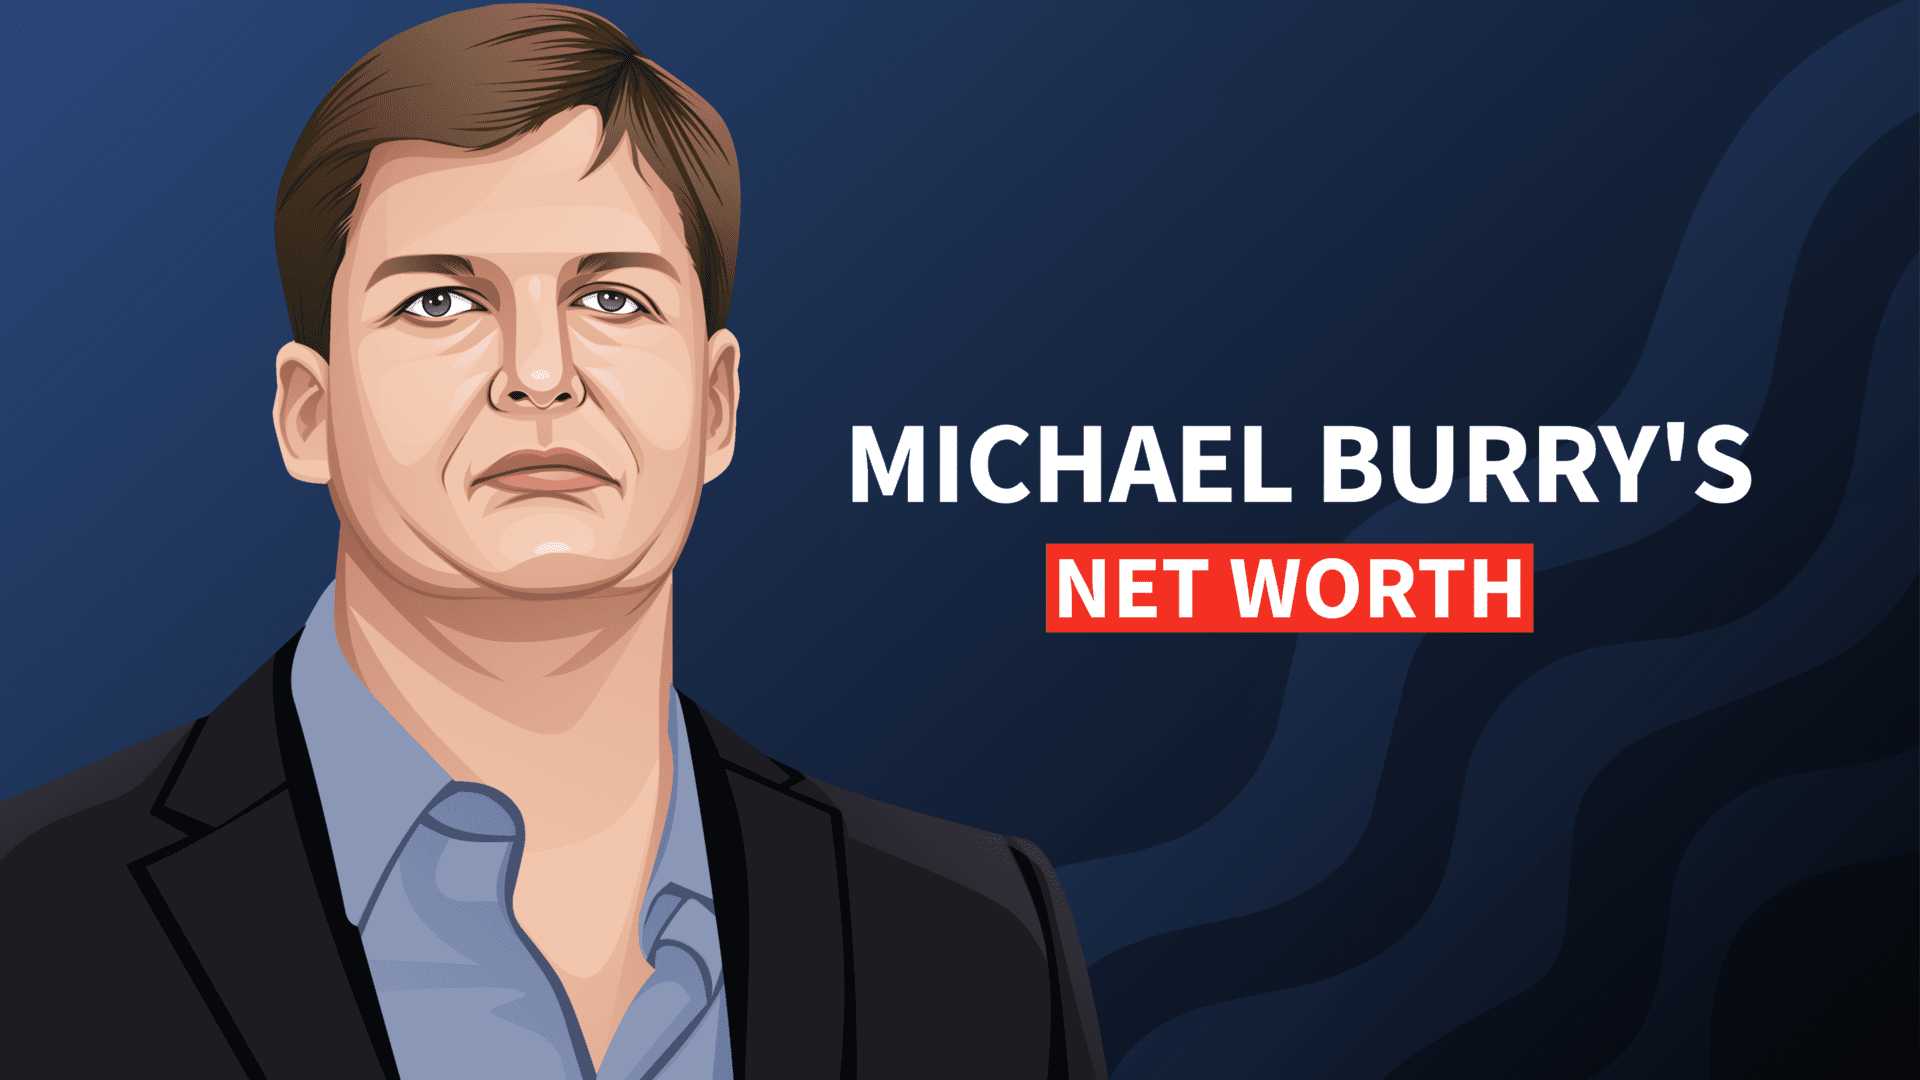 Michael Burry's Net Worth and Investor Story